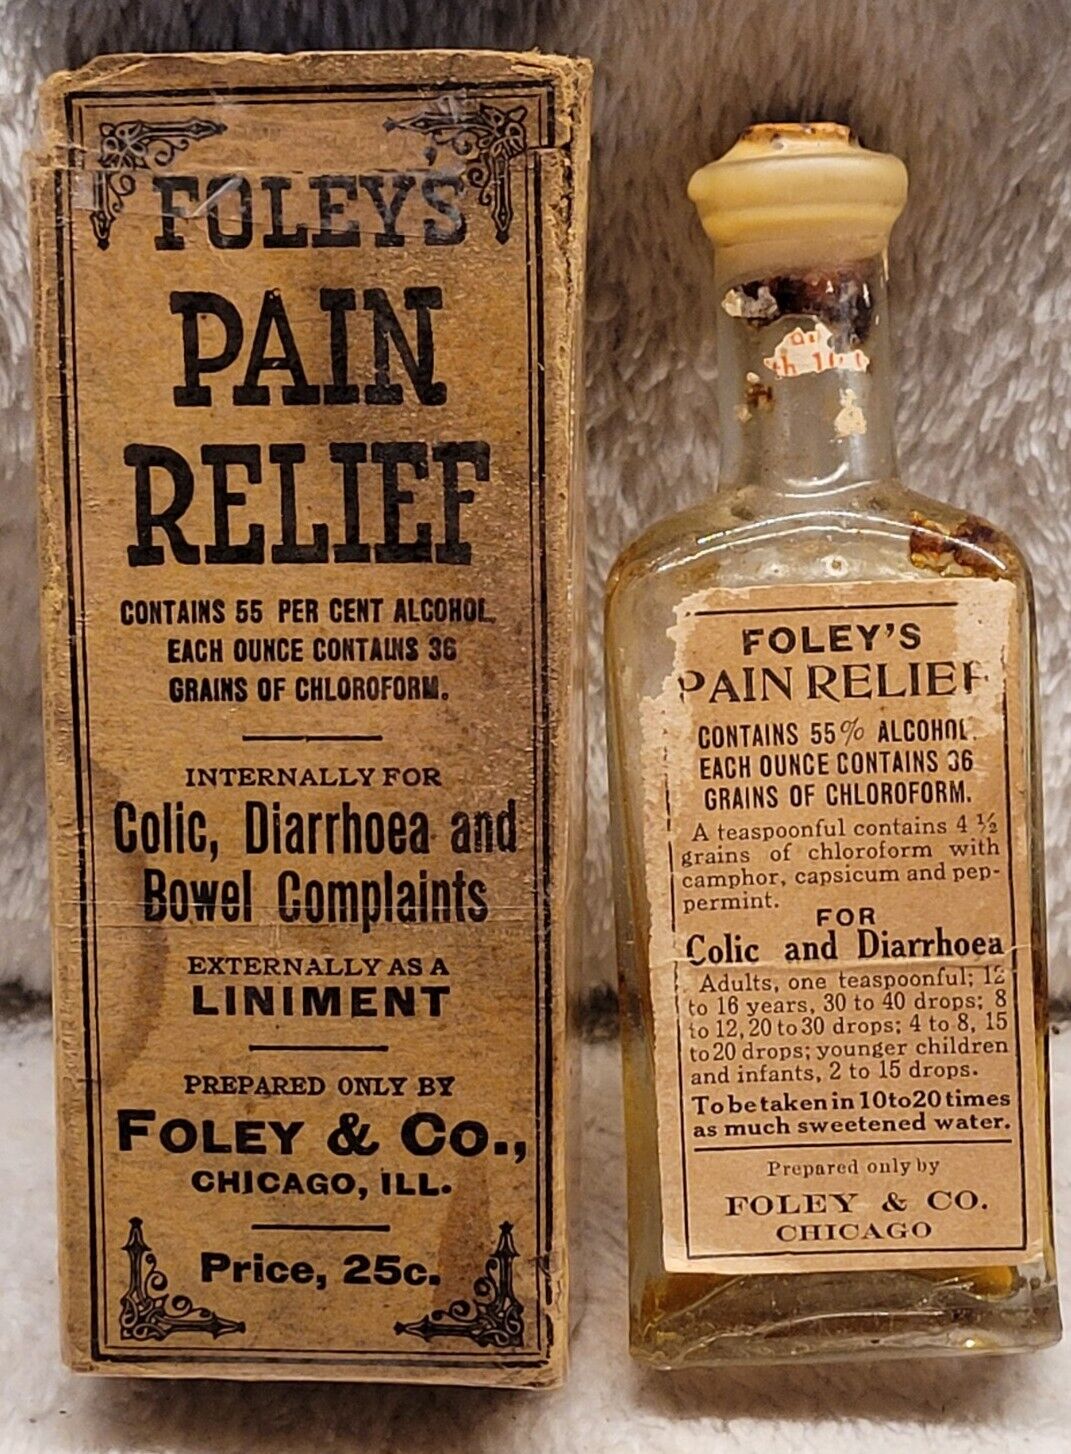 RARE ANTIQUE BOTTLE FOLEY\'S PAIN RELIEF EARLY PHARMACEUTICAL ELIXIR WITH BOX